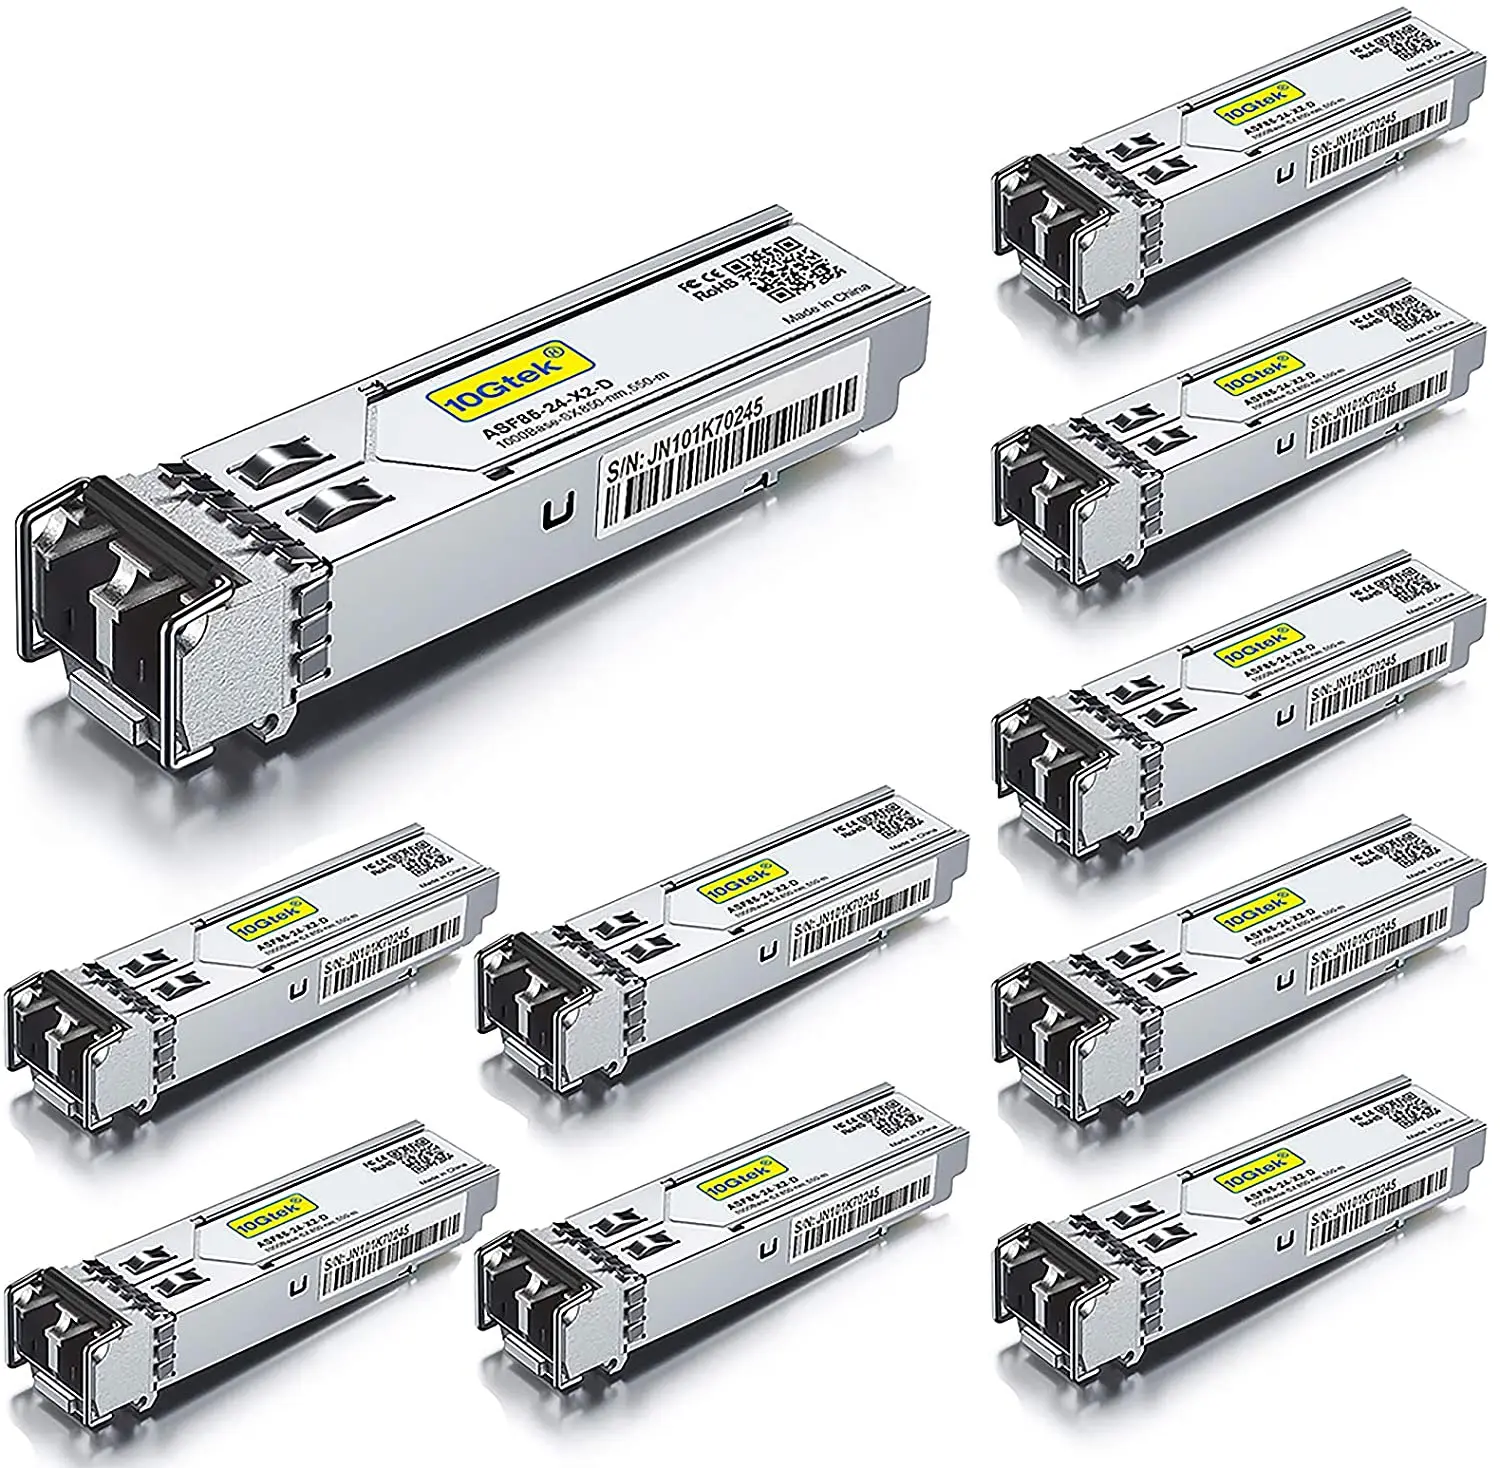 1.25G SFP 1000Base-SX, 850nm MMF, Up to 550 Meters, Compatible with Cisco GLC-SX-MMD, Meraki MA-SFP-1GB-SXU, Pack of 10